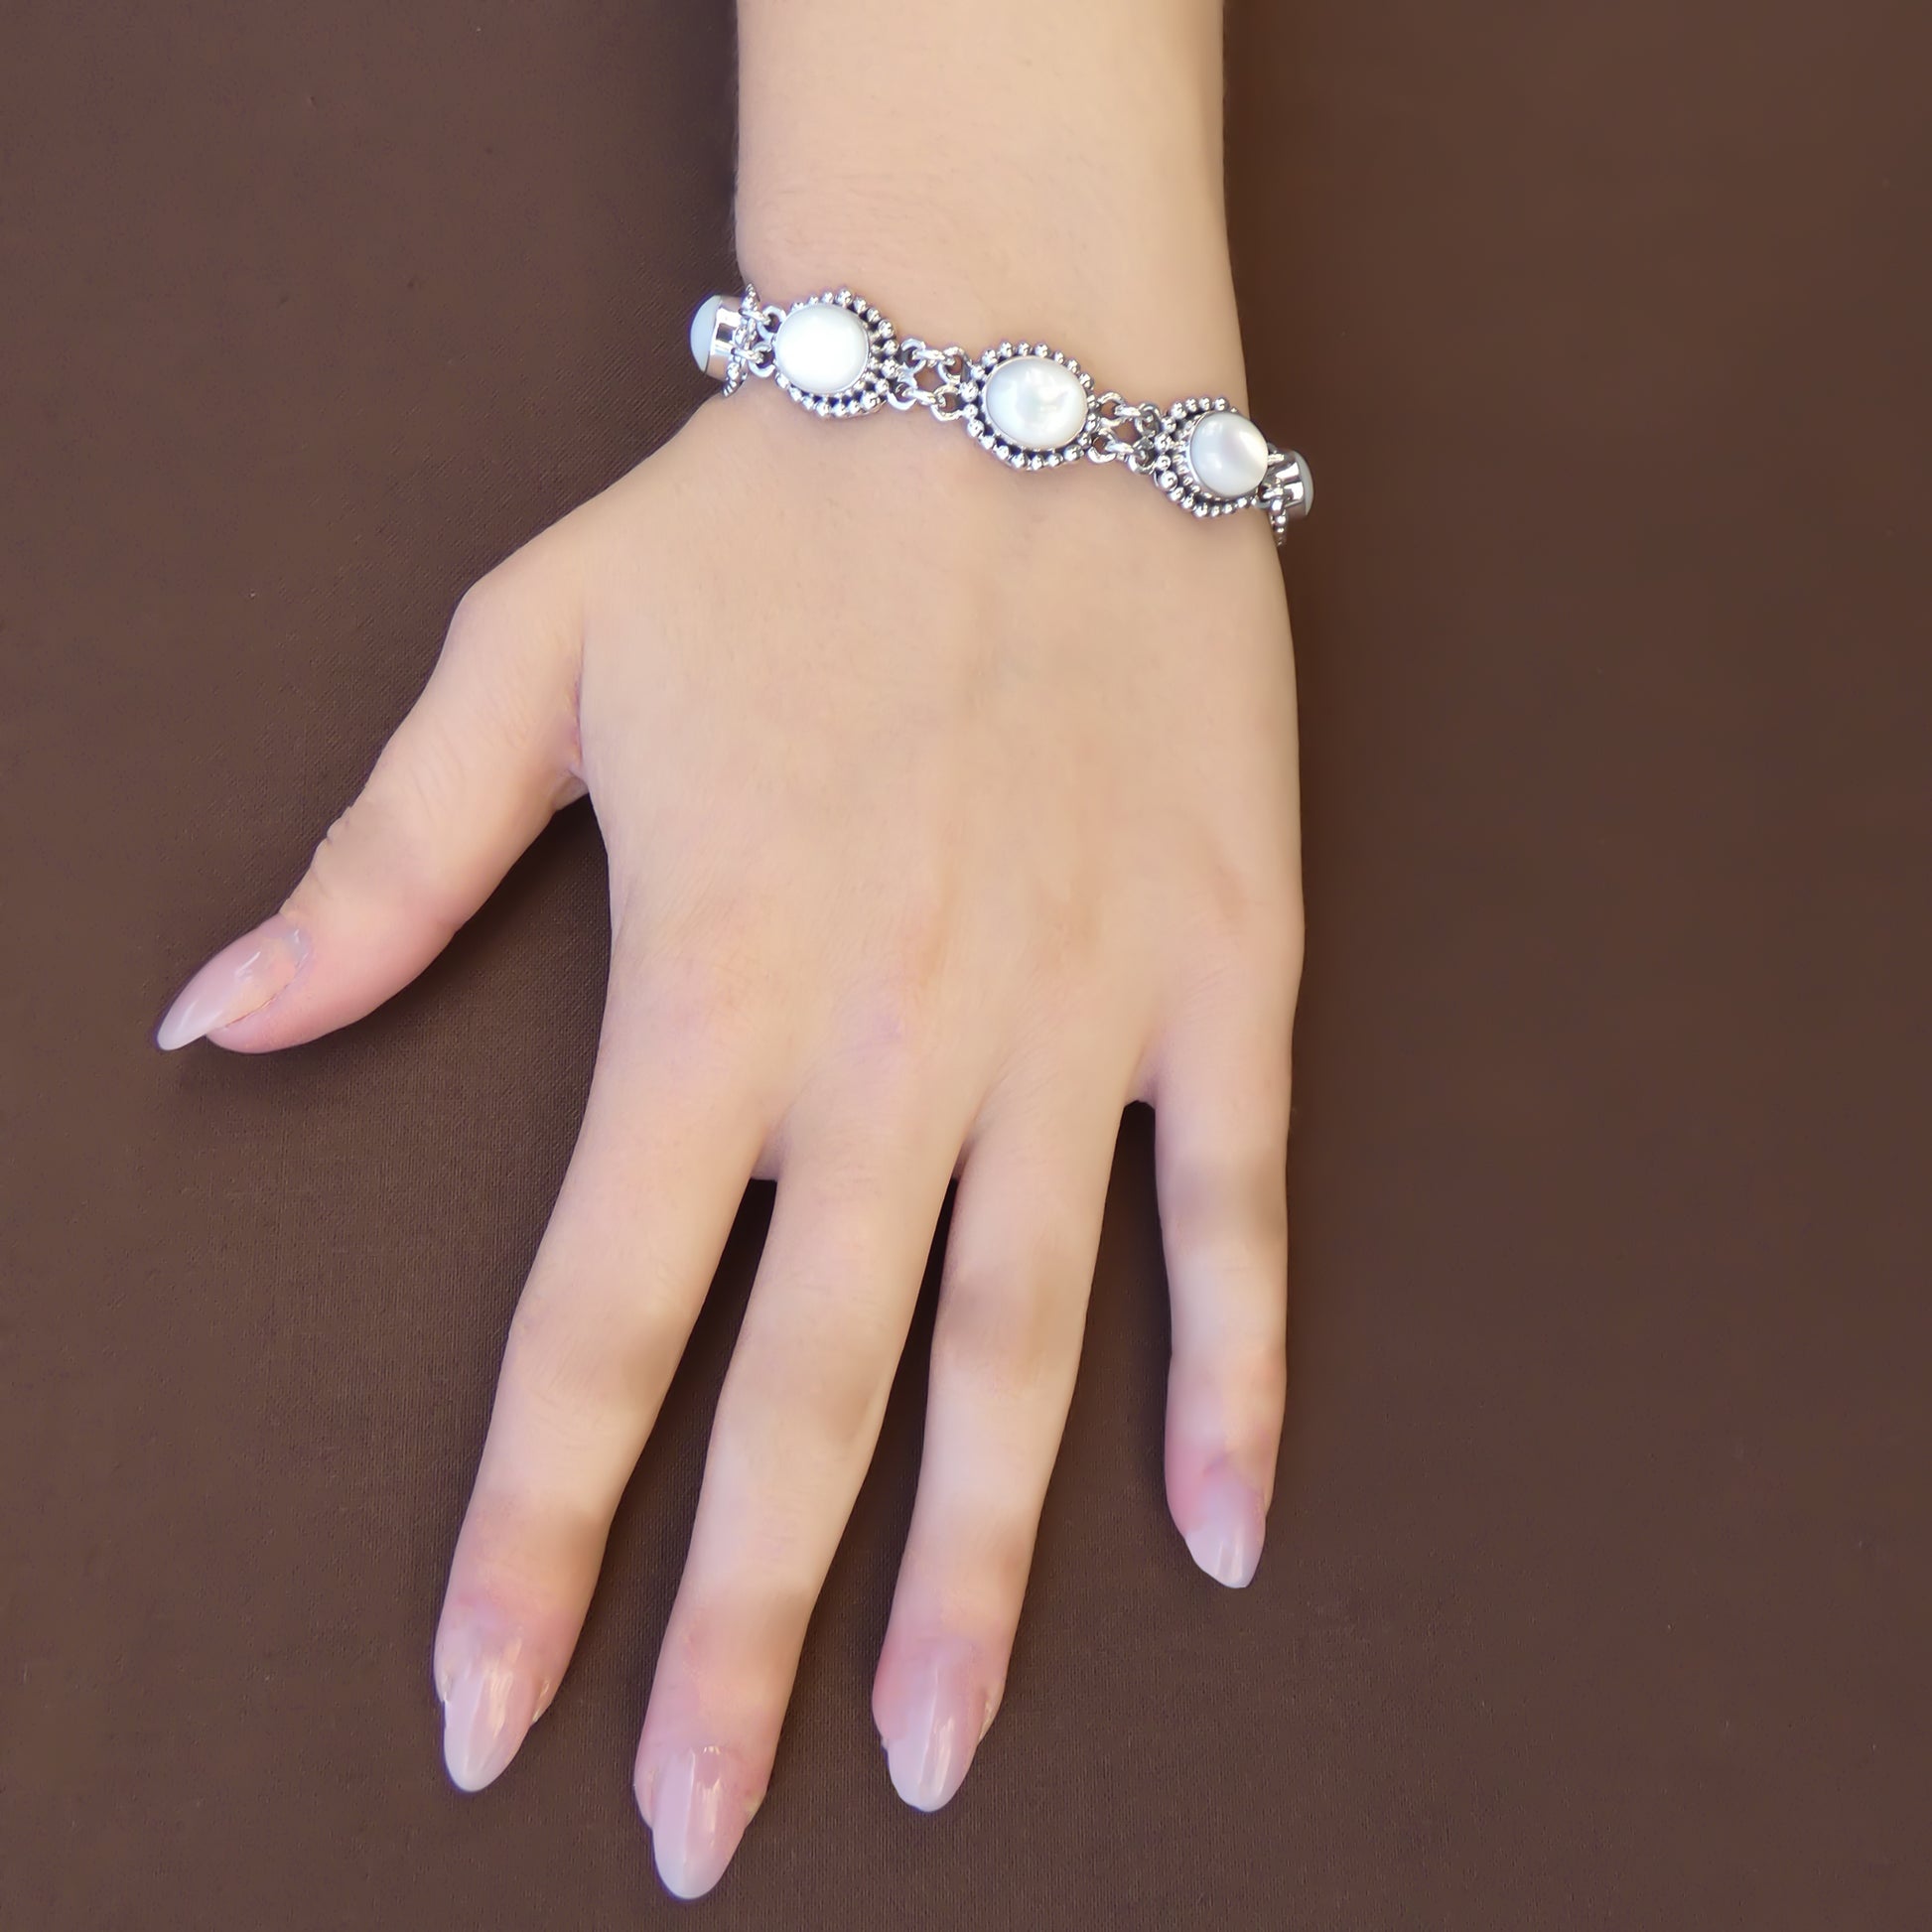 Woman wearing a silver link bracelet with oval mother of pearl stones and bead accents.